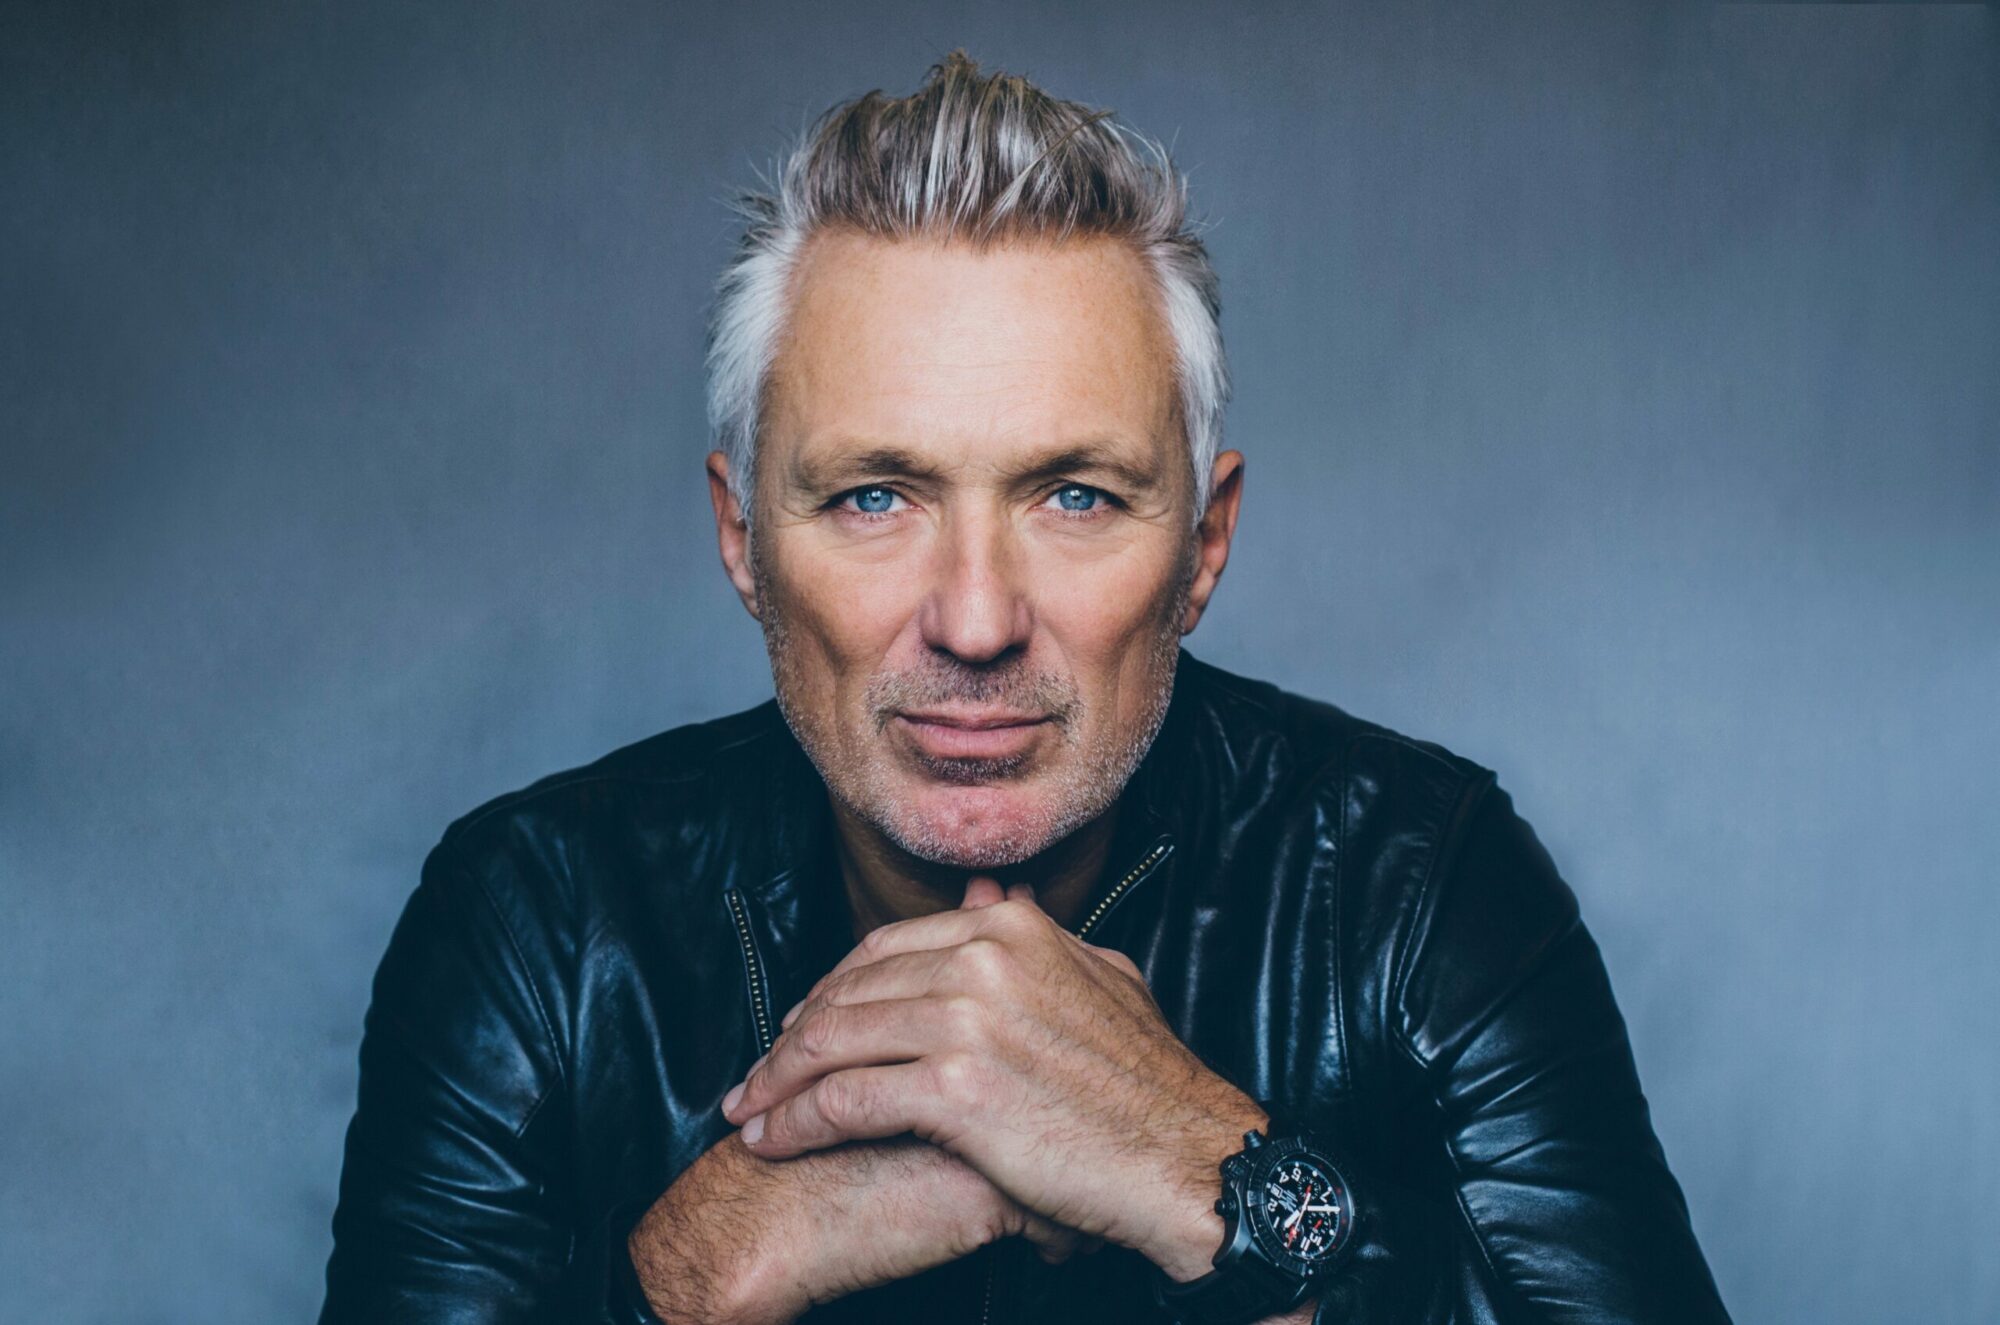 Image name Martin Kemp Back to the 80s at York Barbican York scaled the 1 image from the post Martin Kemp - Back to the 80s at York Barbican, York in Yorkshire.com.